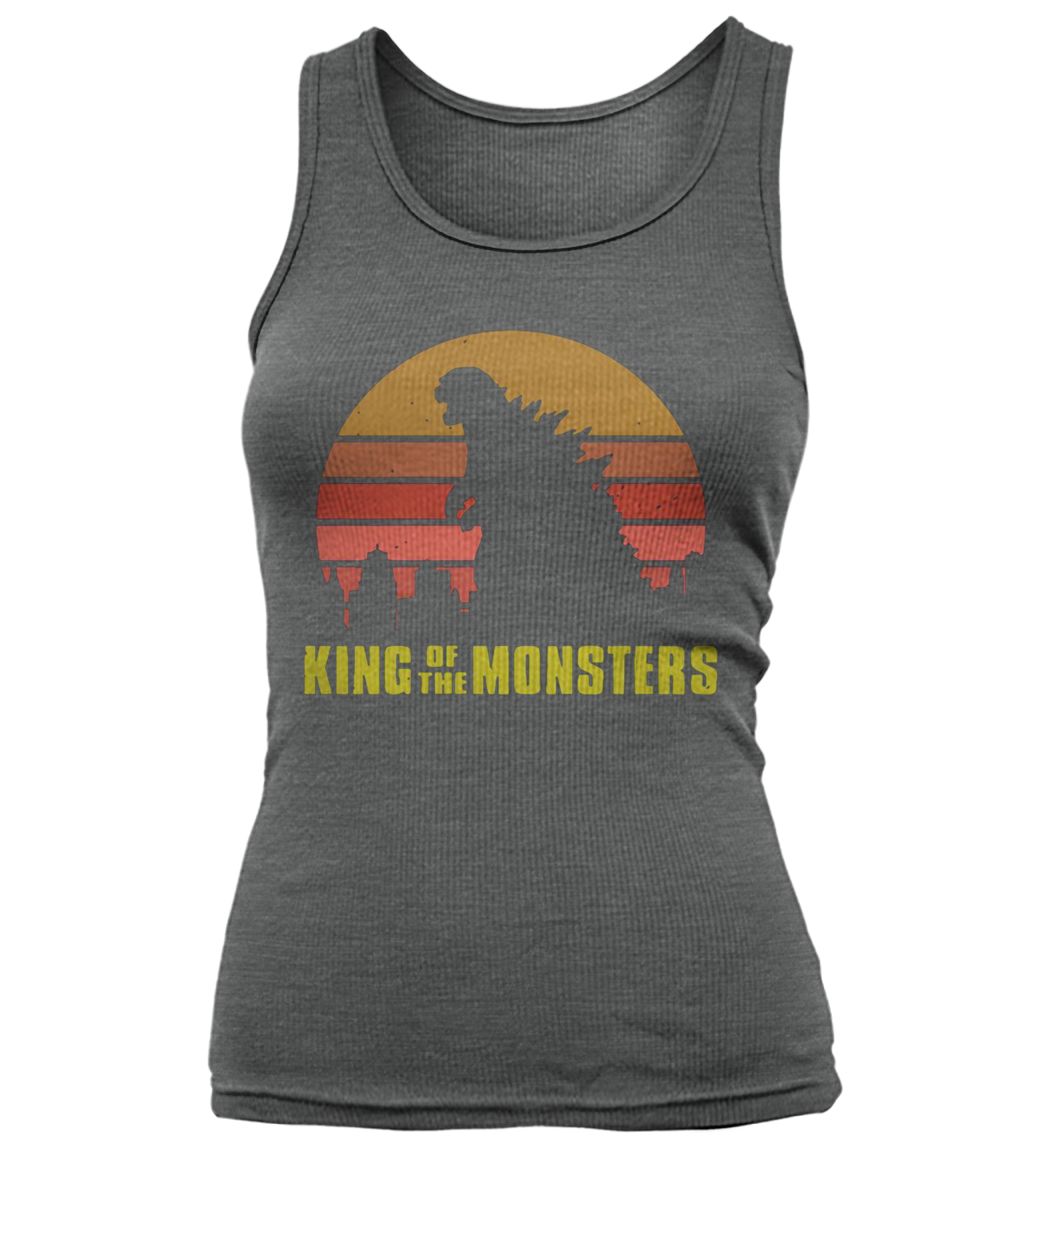 Vintage godzilla king of the monsters women's tank top